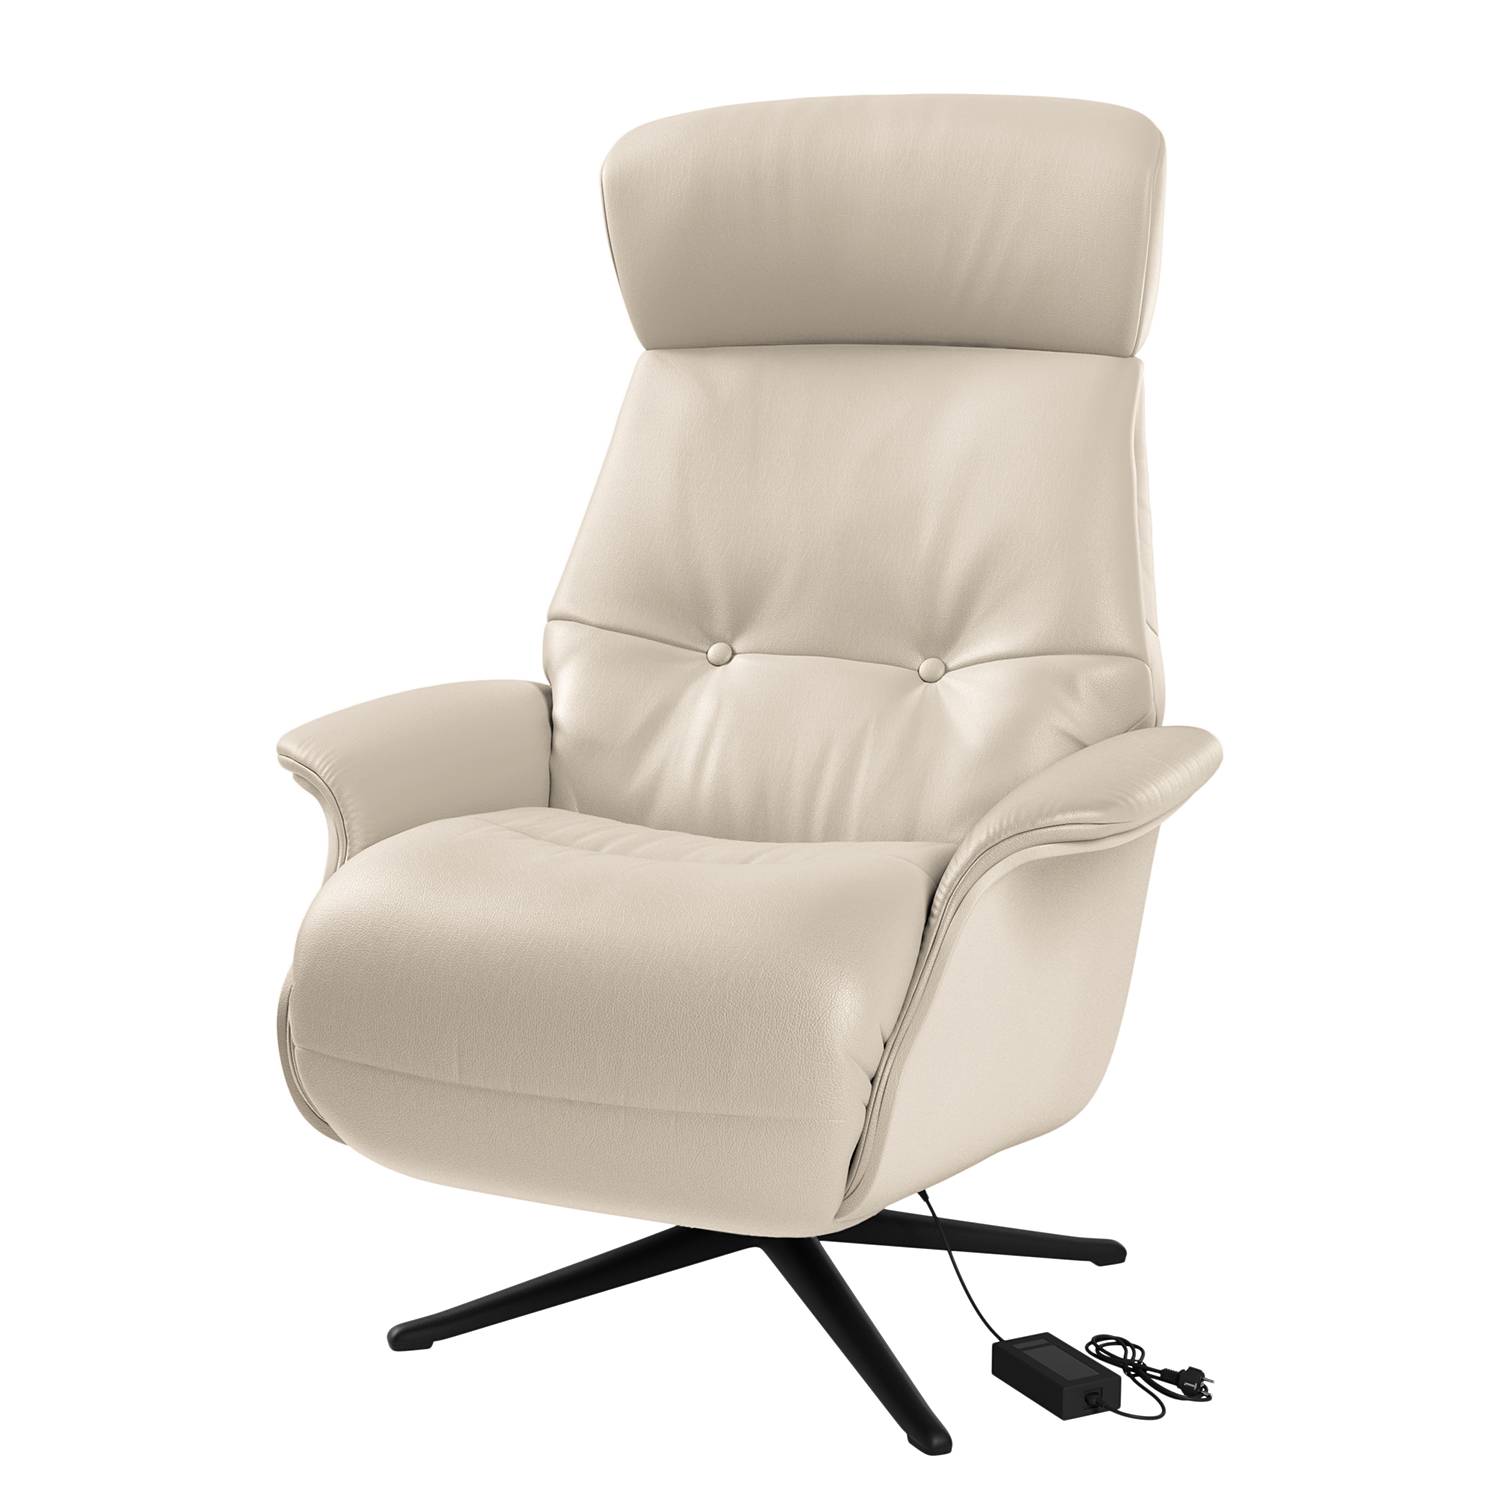 Image of Fauteuil relax Anderson VI 000000001000131441